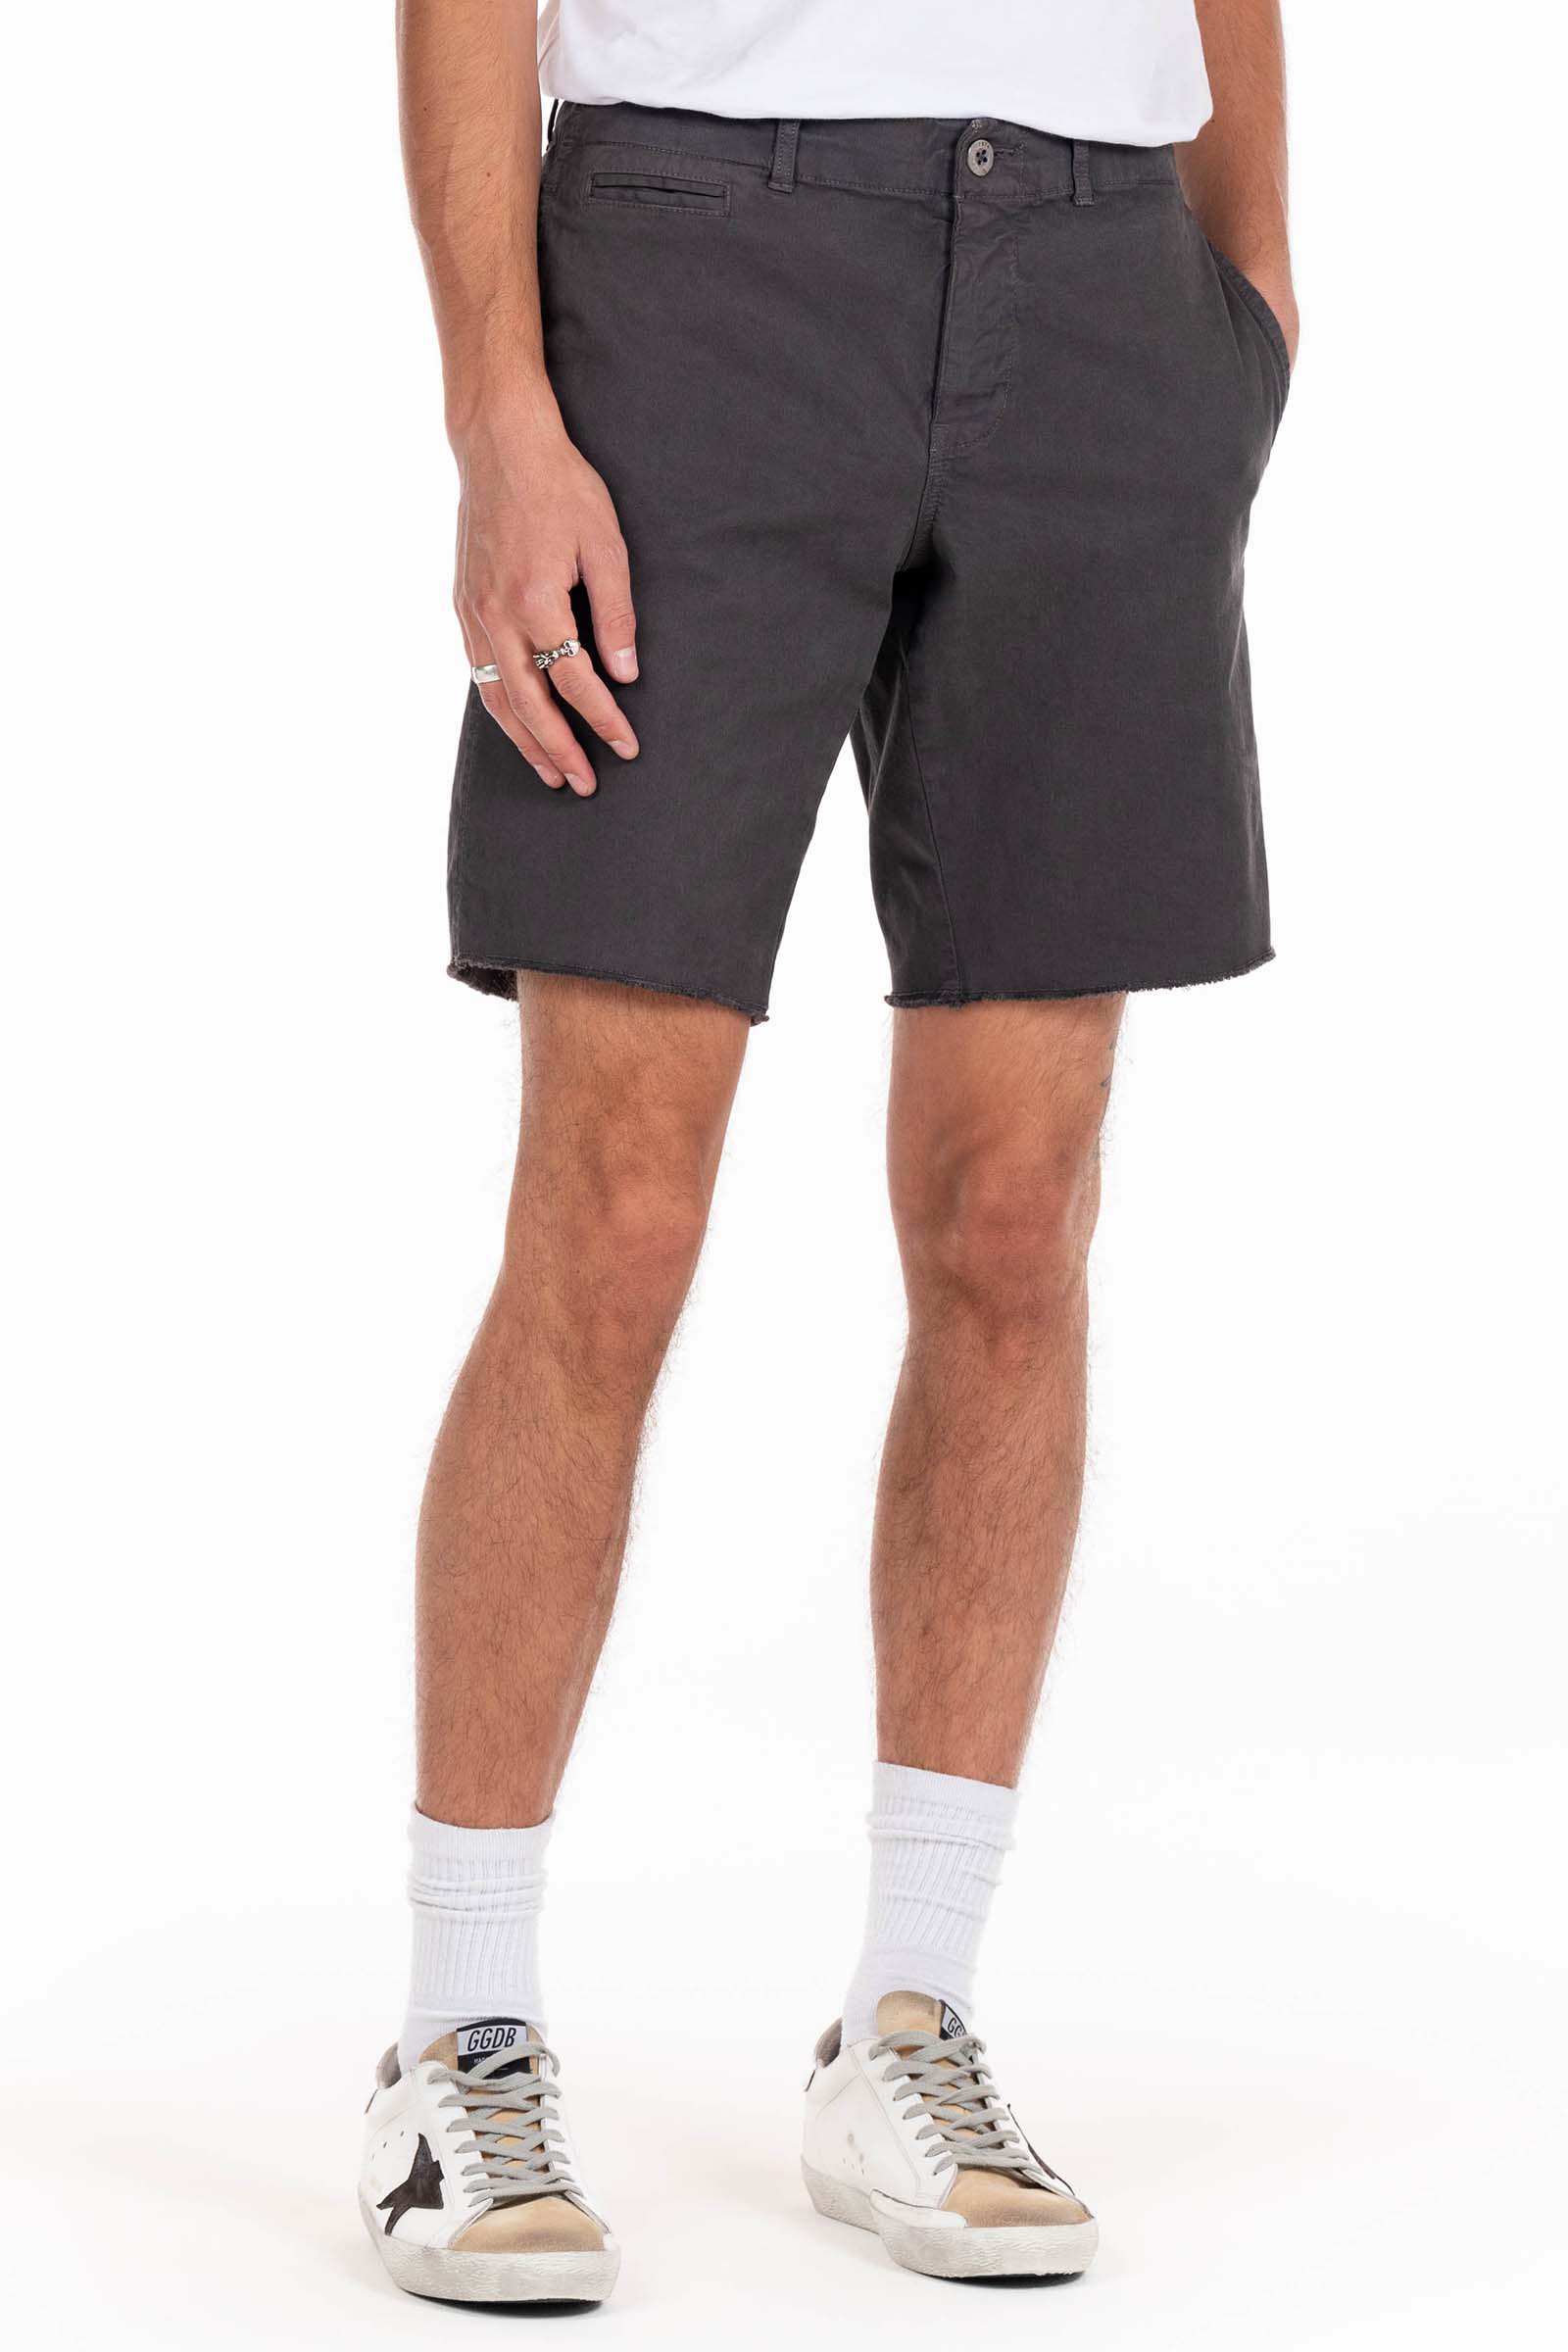 Original Paperbacks Rockland Chino Short in Vintage Black on Model Cropped Styled View